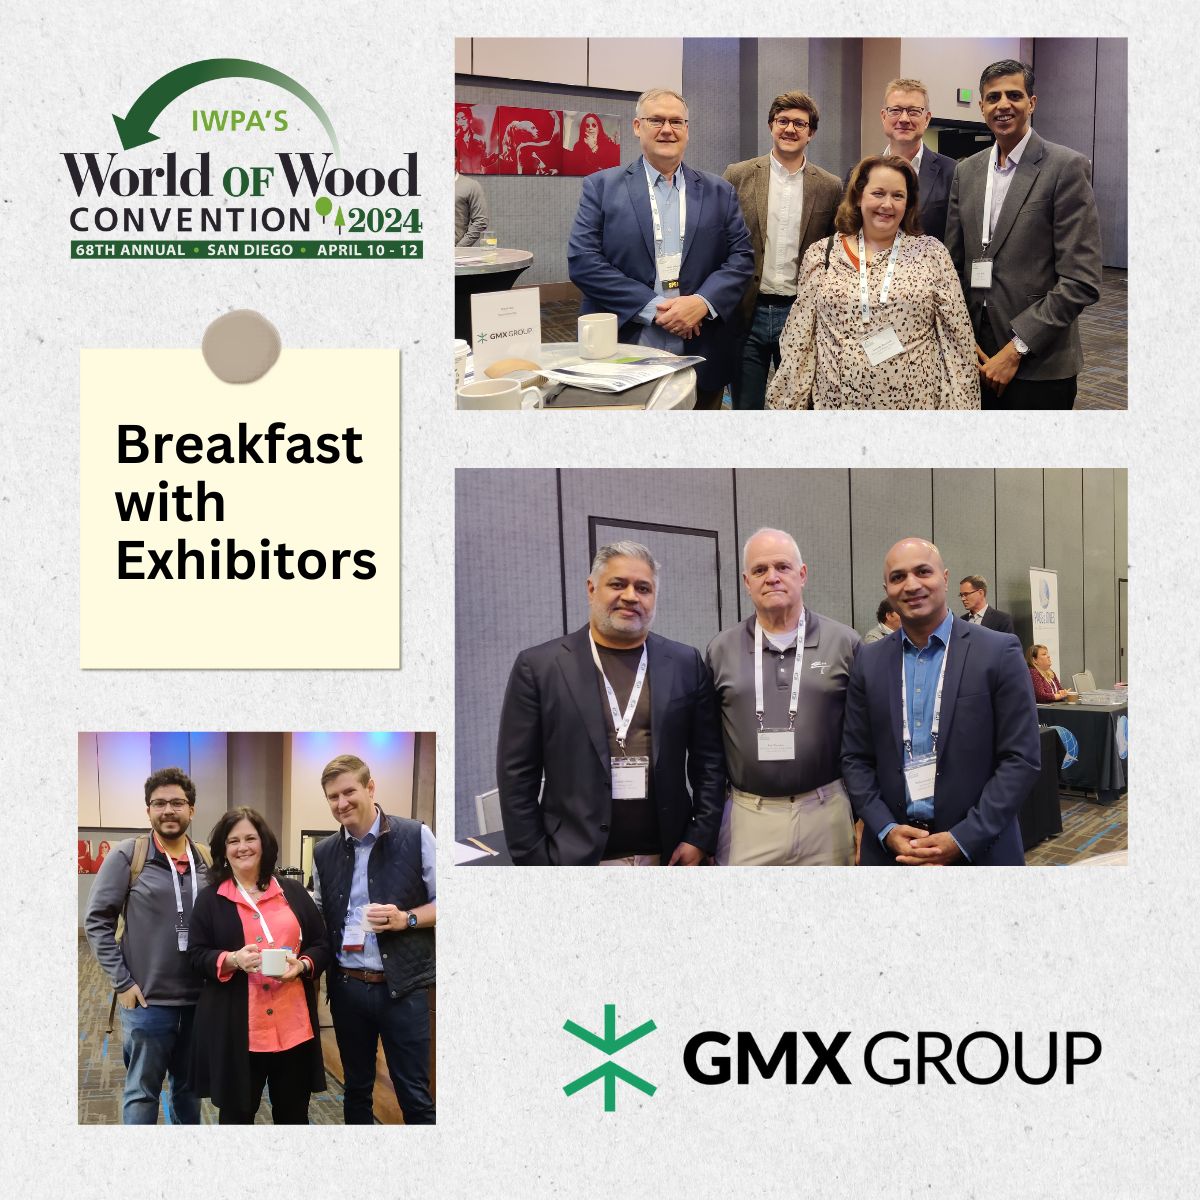 As we all start the day, it reminds us to share some more breakfast photos from the exhibit hall at World of Wood. Thank you sponsor GMX Group.